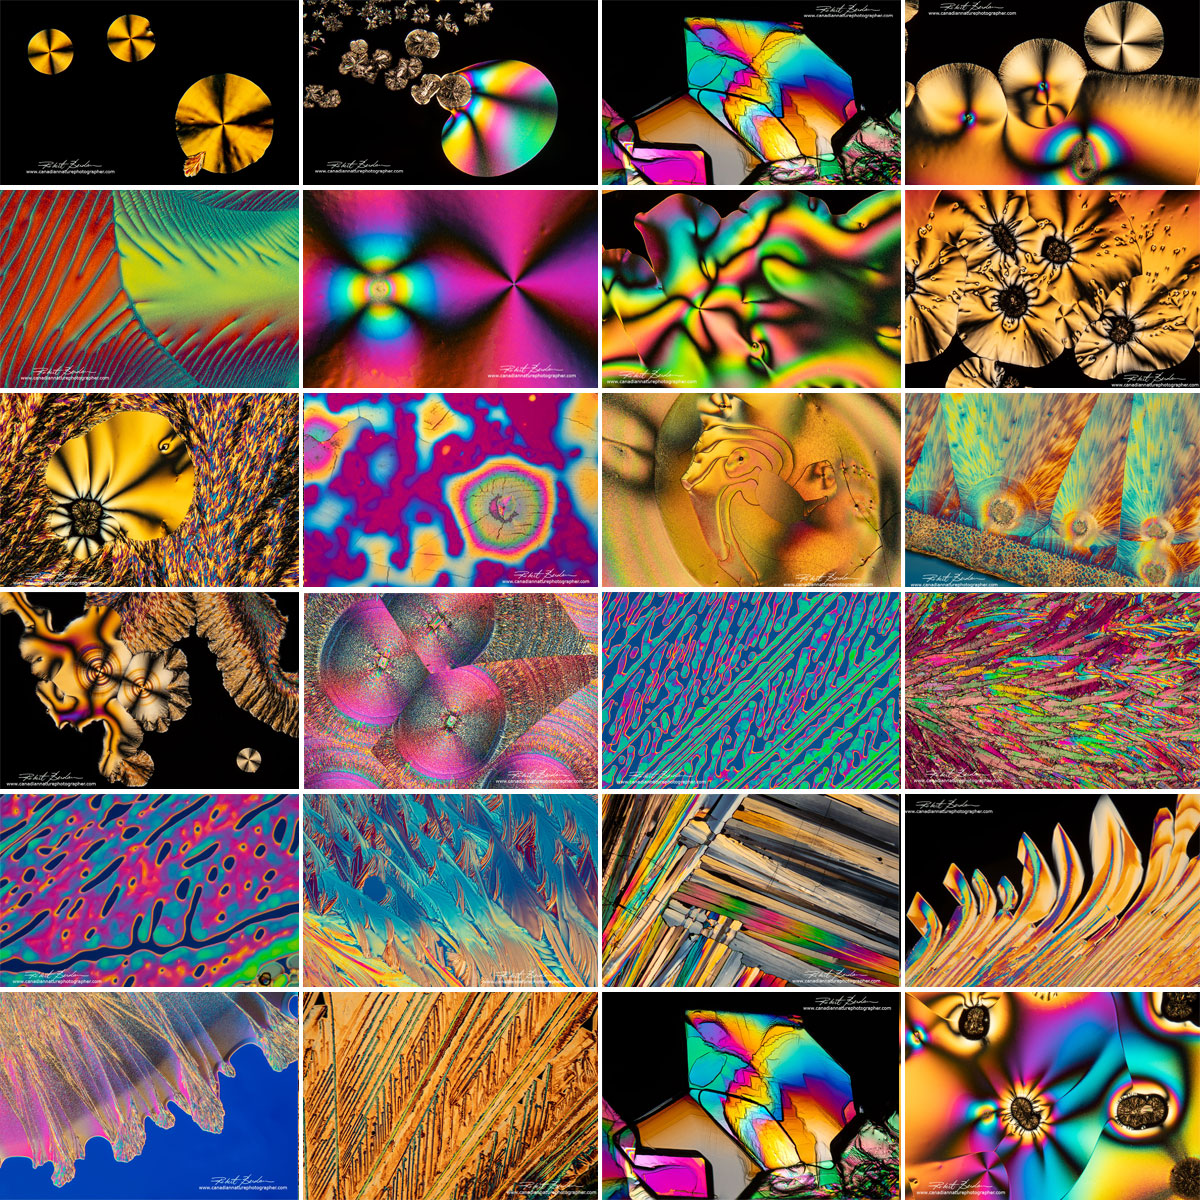 Composite image of polarized light photomicrographs showing several different crystals by Robert Berdan ©